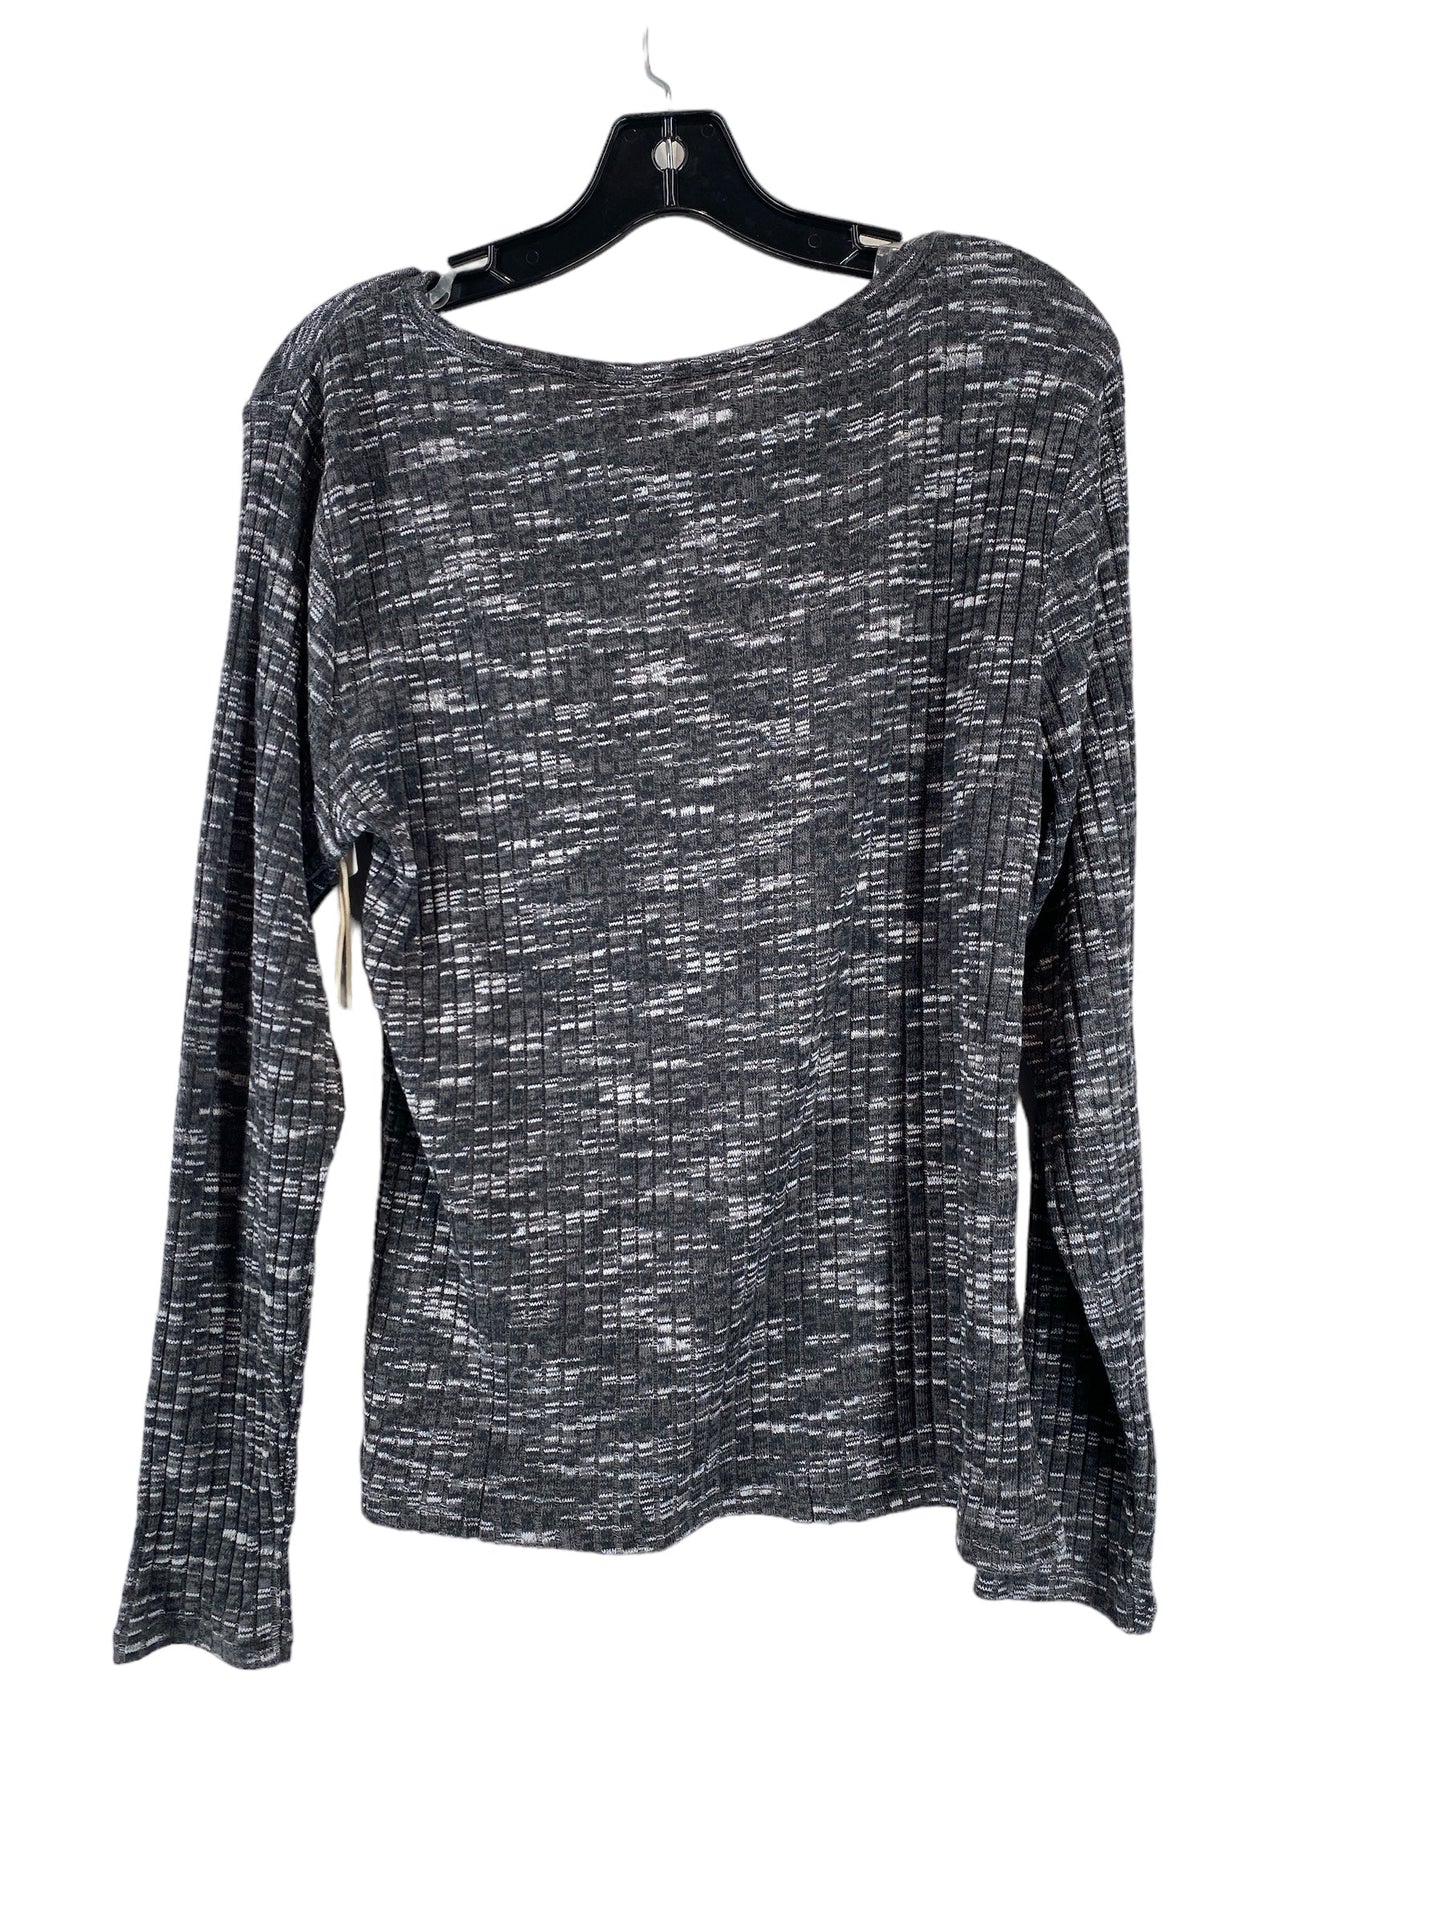 Top Long Sleeve By Ana  Size: Xl